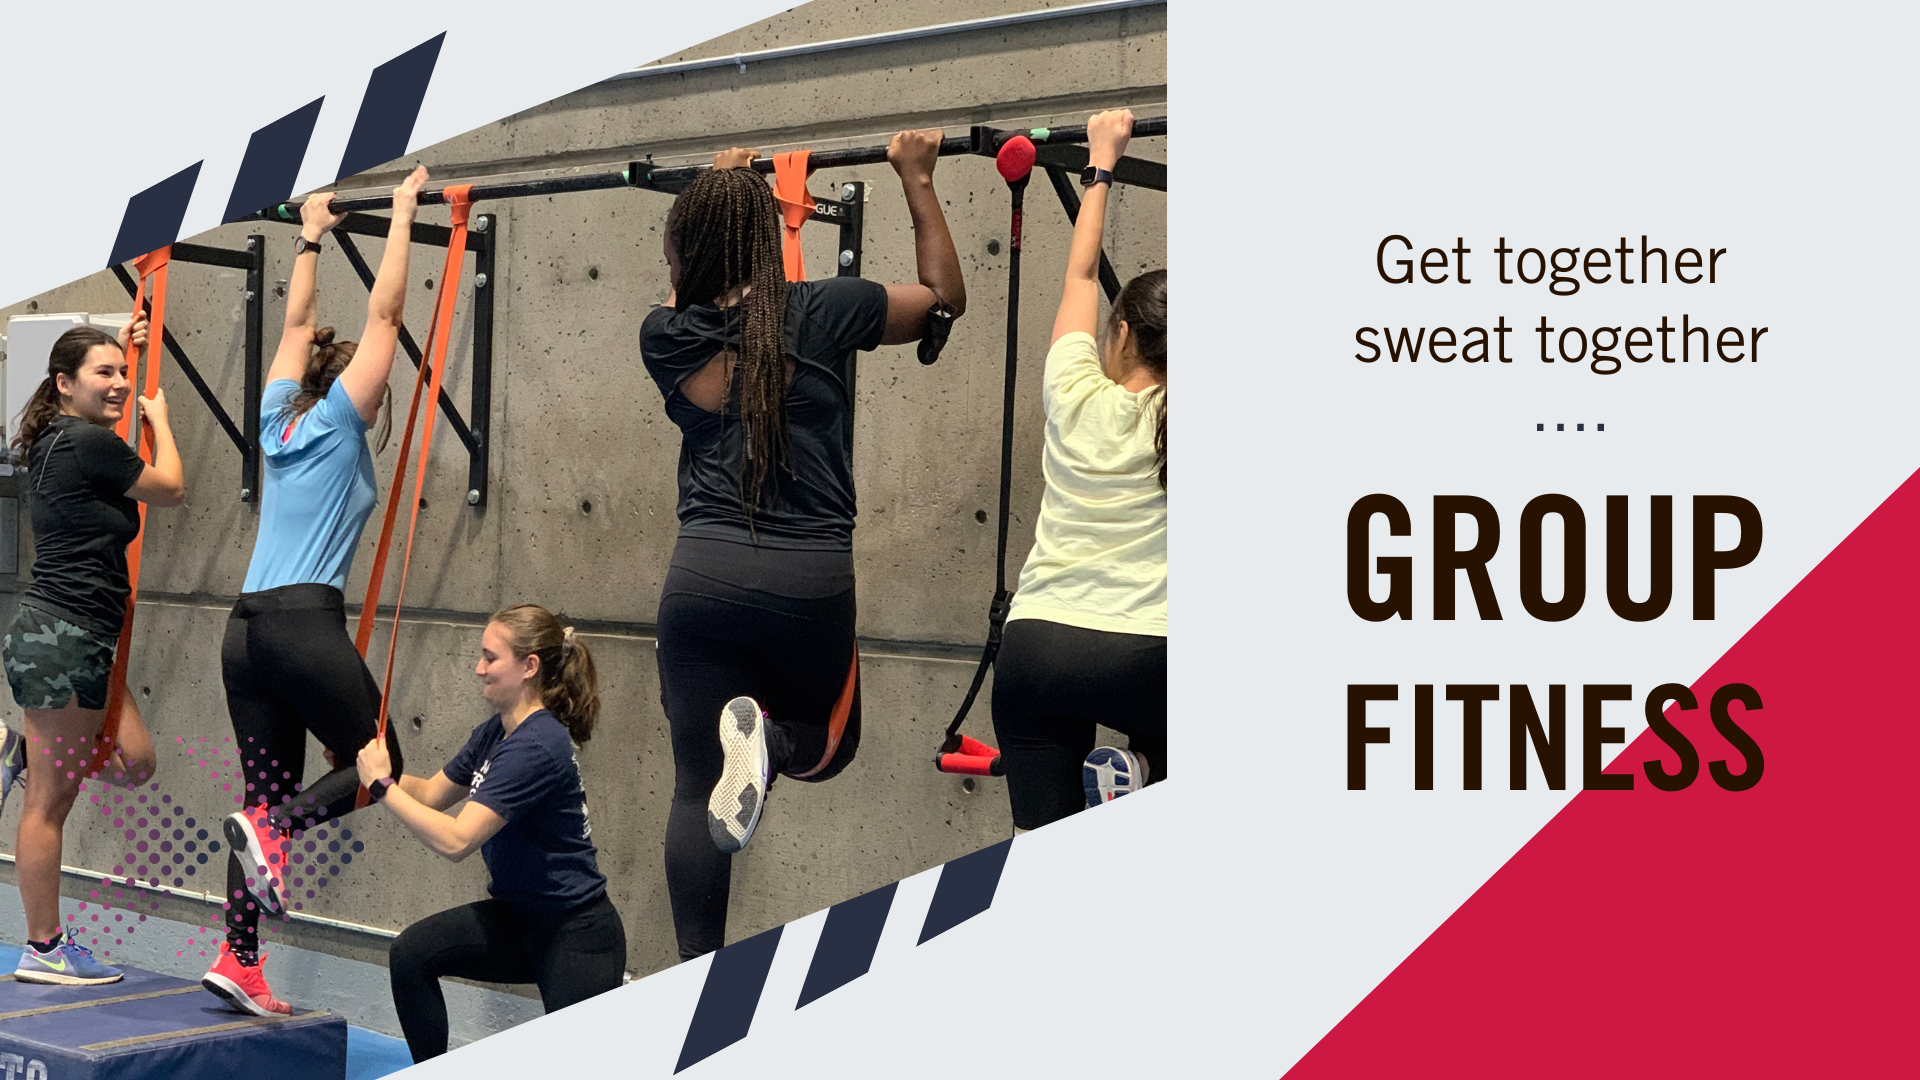 image depicts group of women doing pullups with bands and assisted by coach